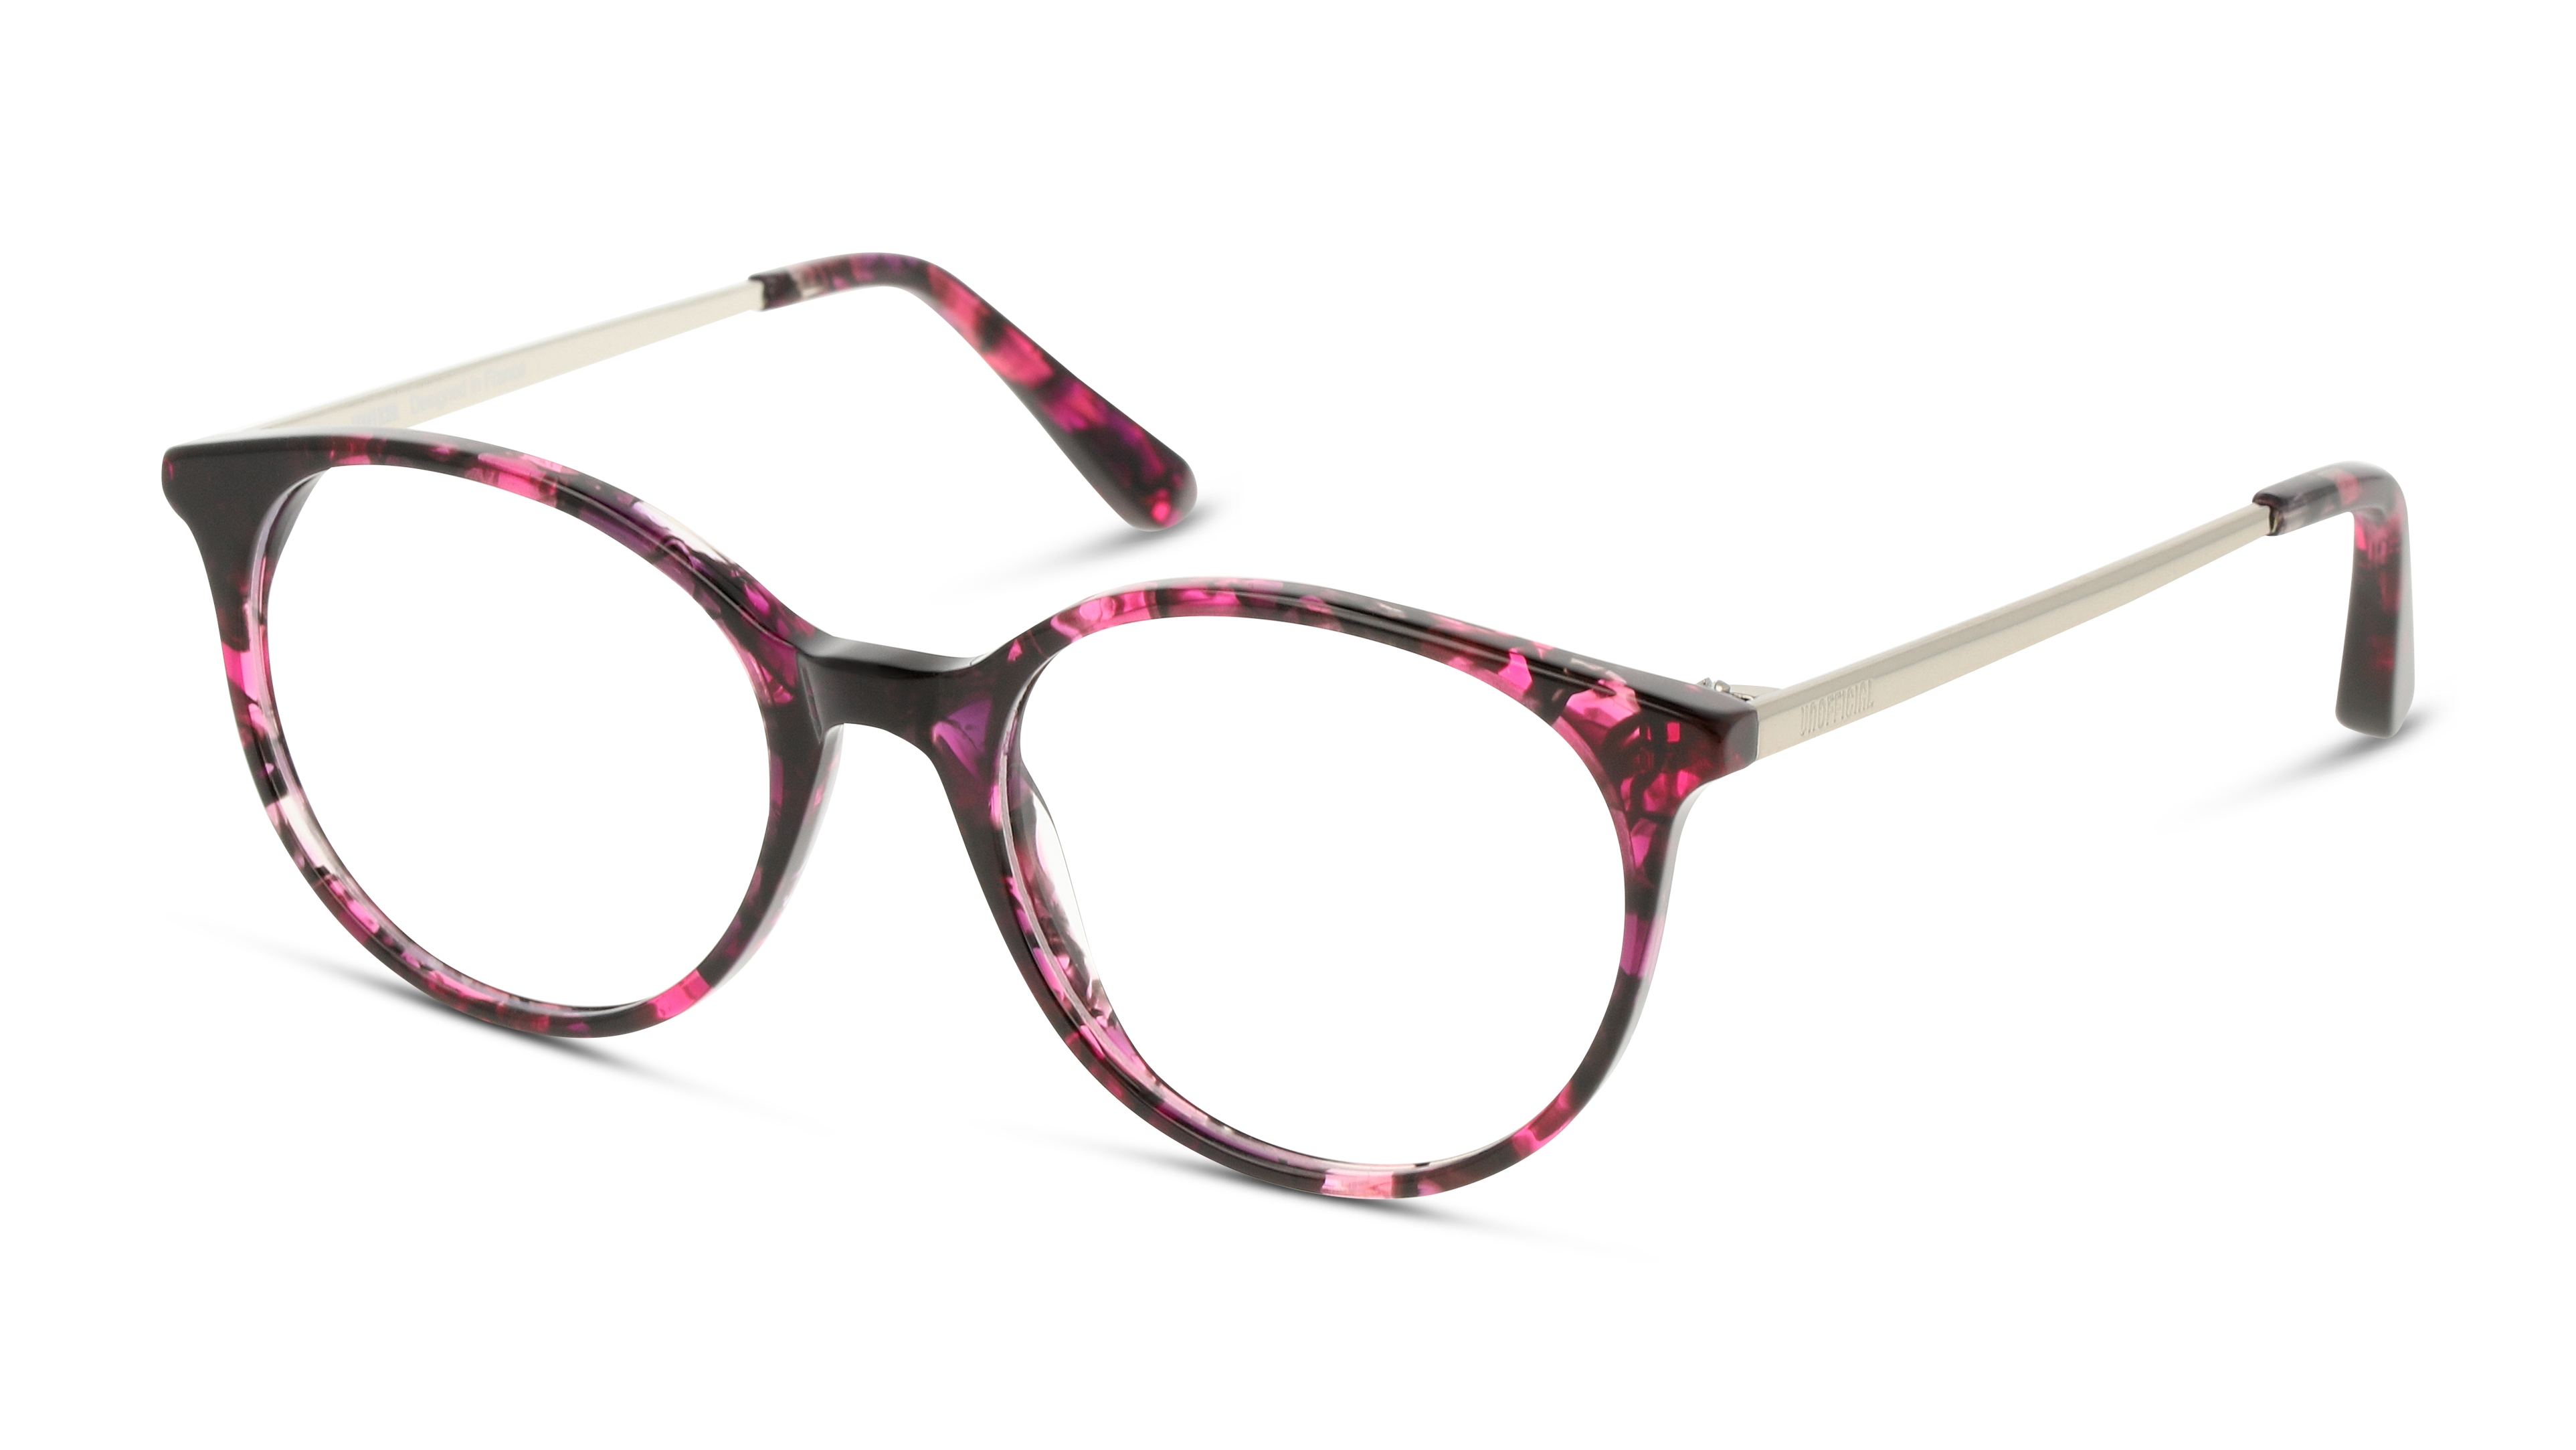 Angle_Left01 Unofficial UNOT0021 Children's Glasses Transparent / Pink